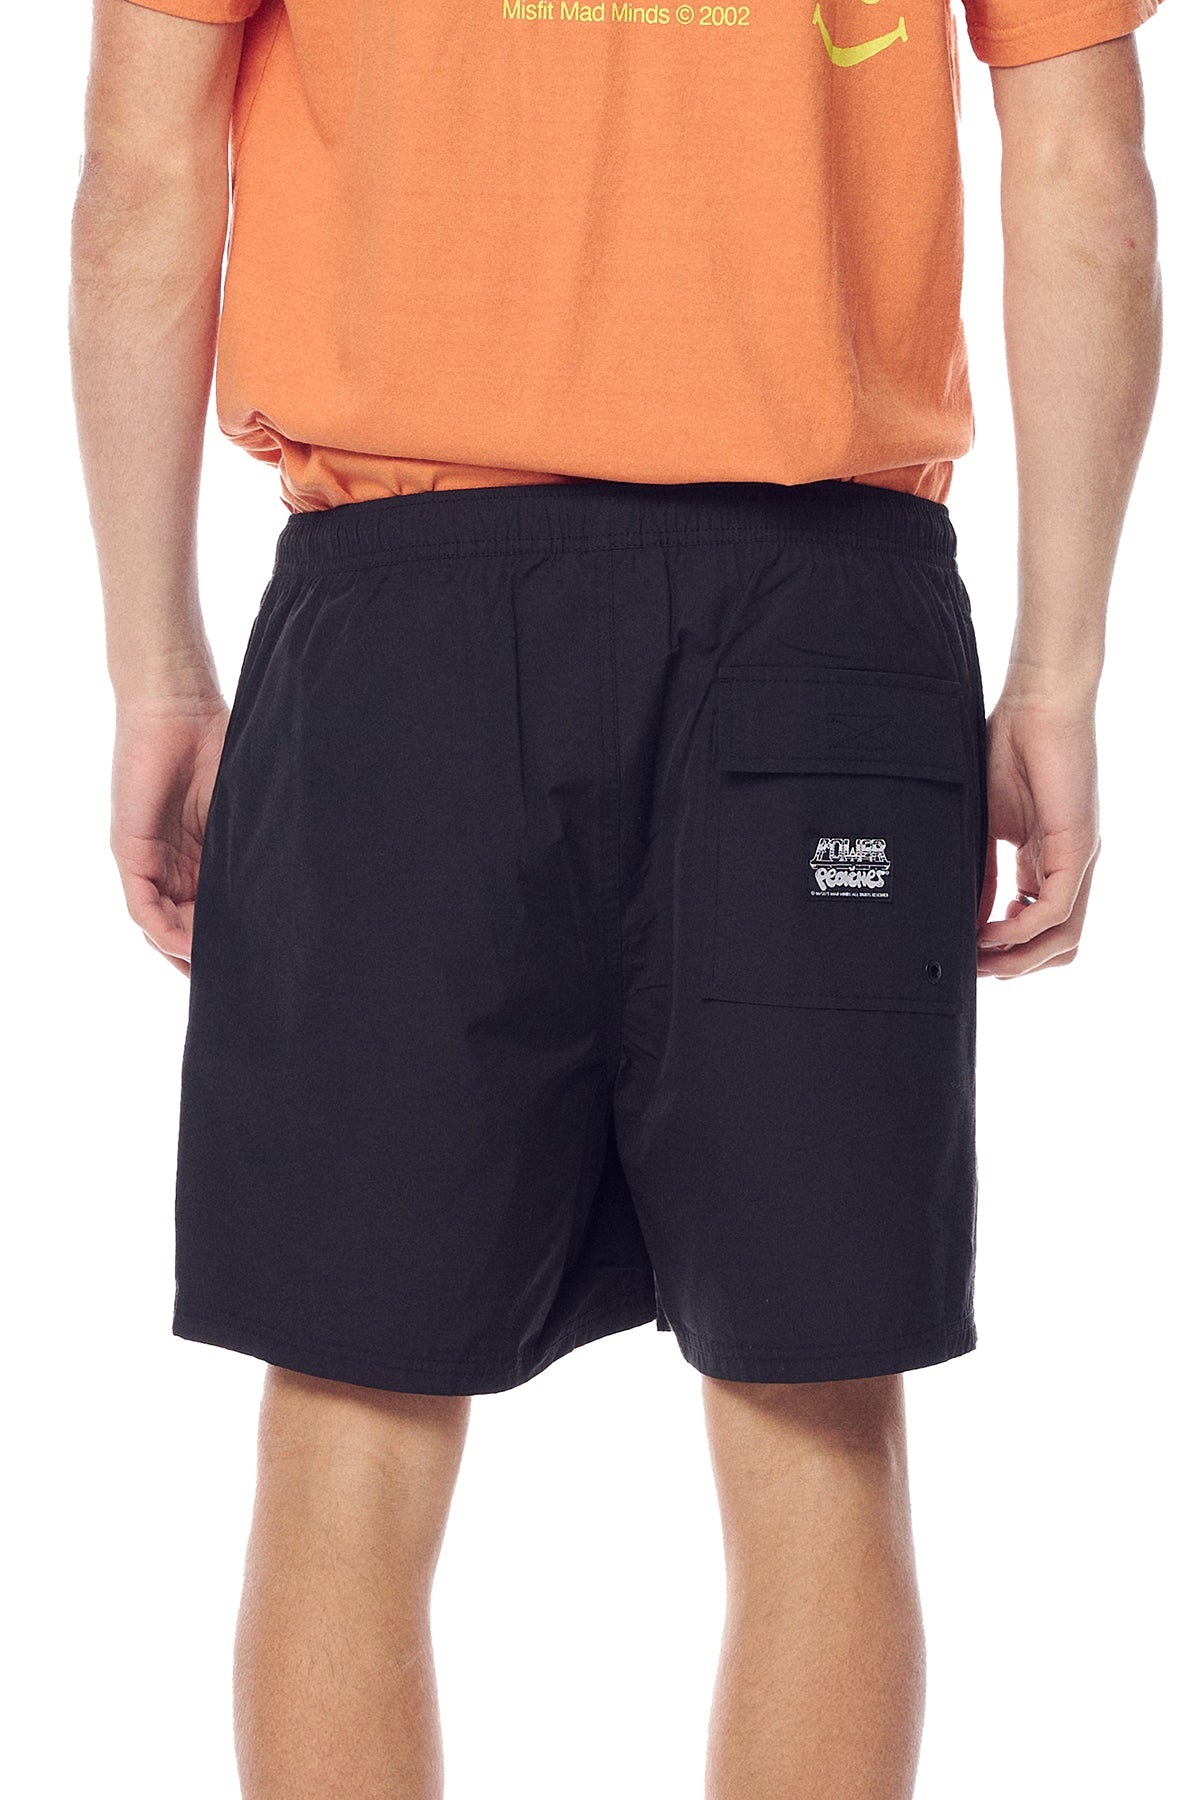 RECYCLED POWER SHORT - Black